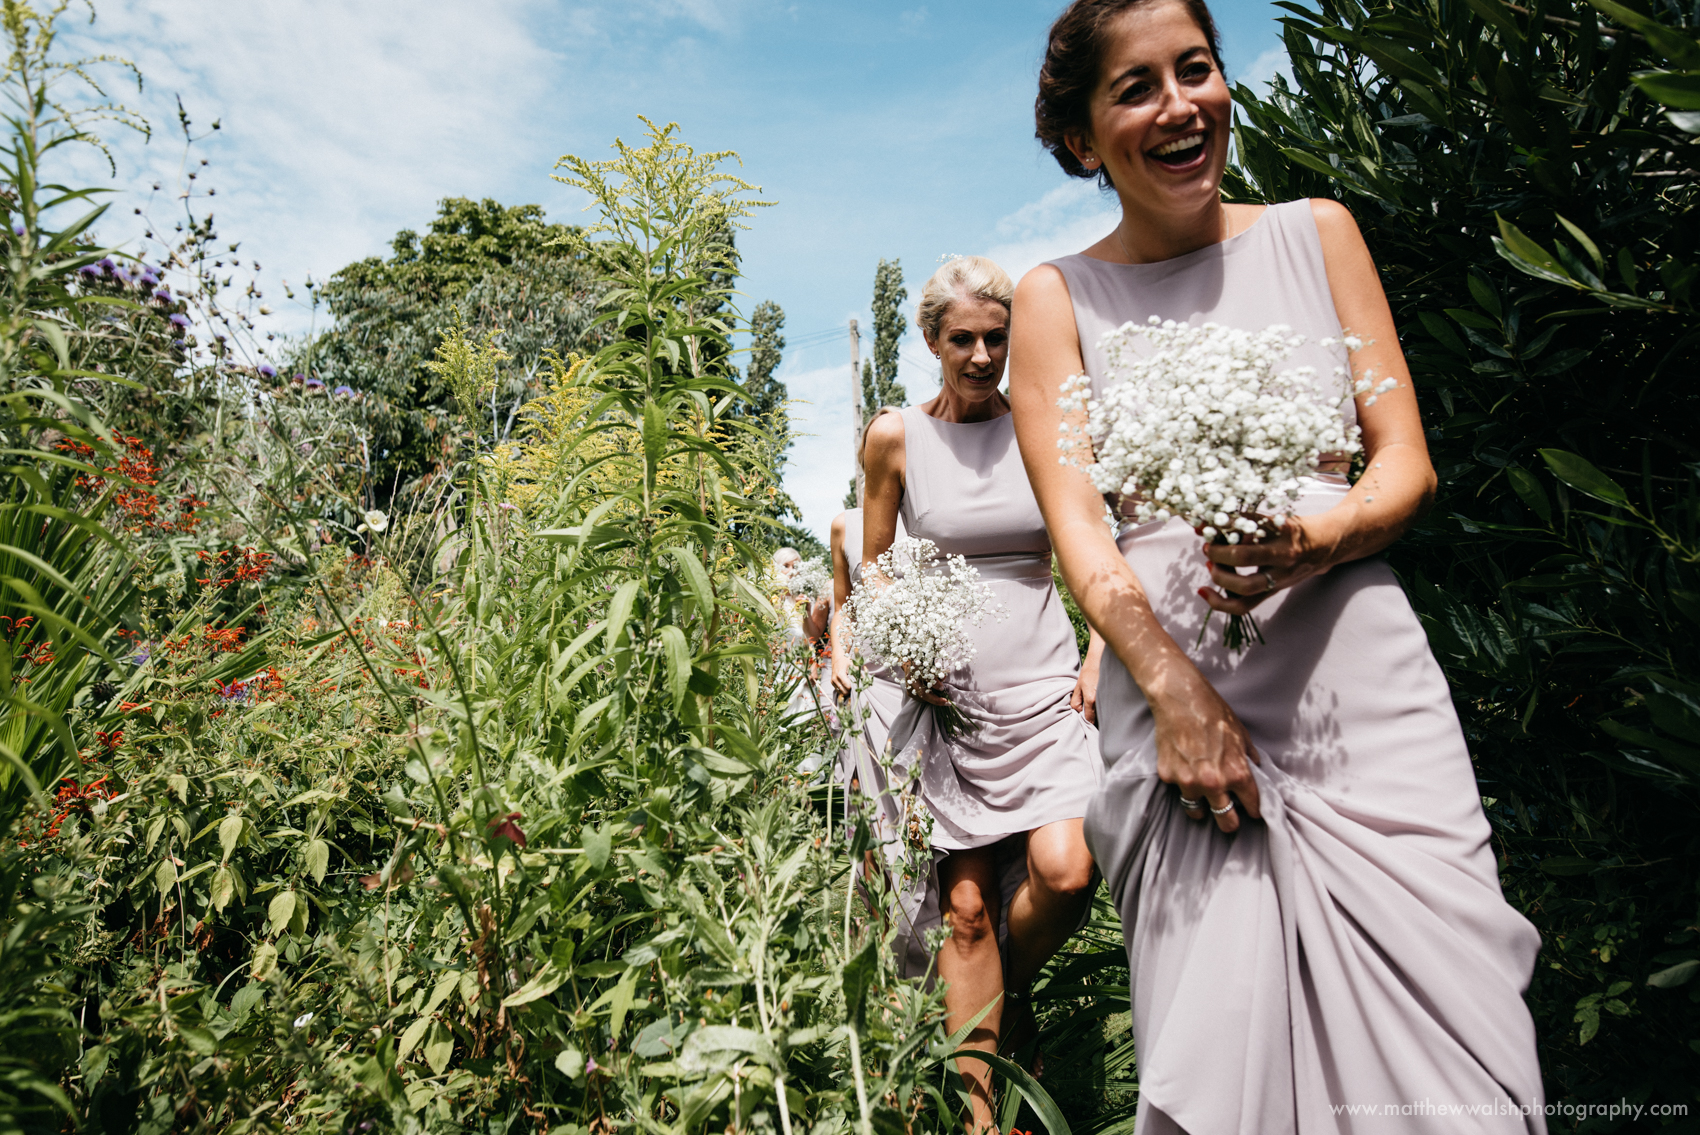 A bit of an adventure as the bridal party fight their way through the flowers